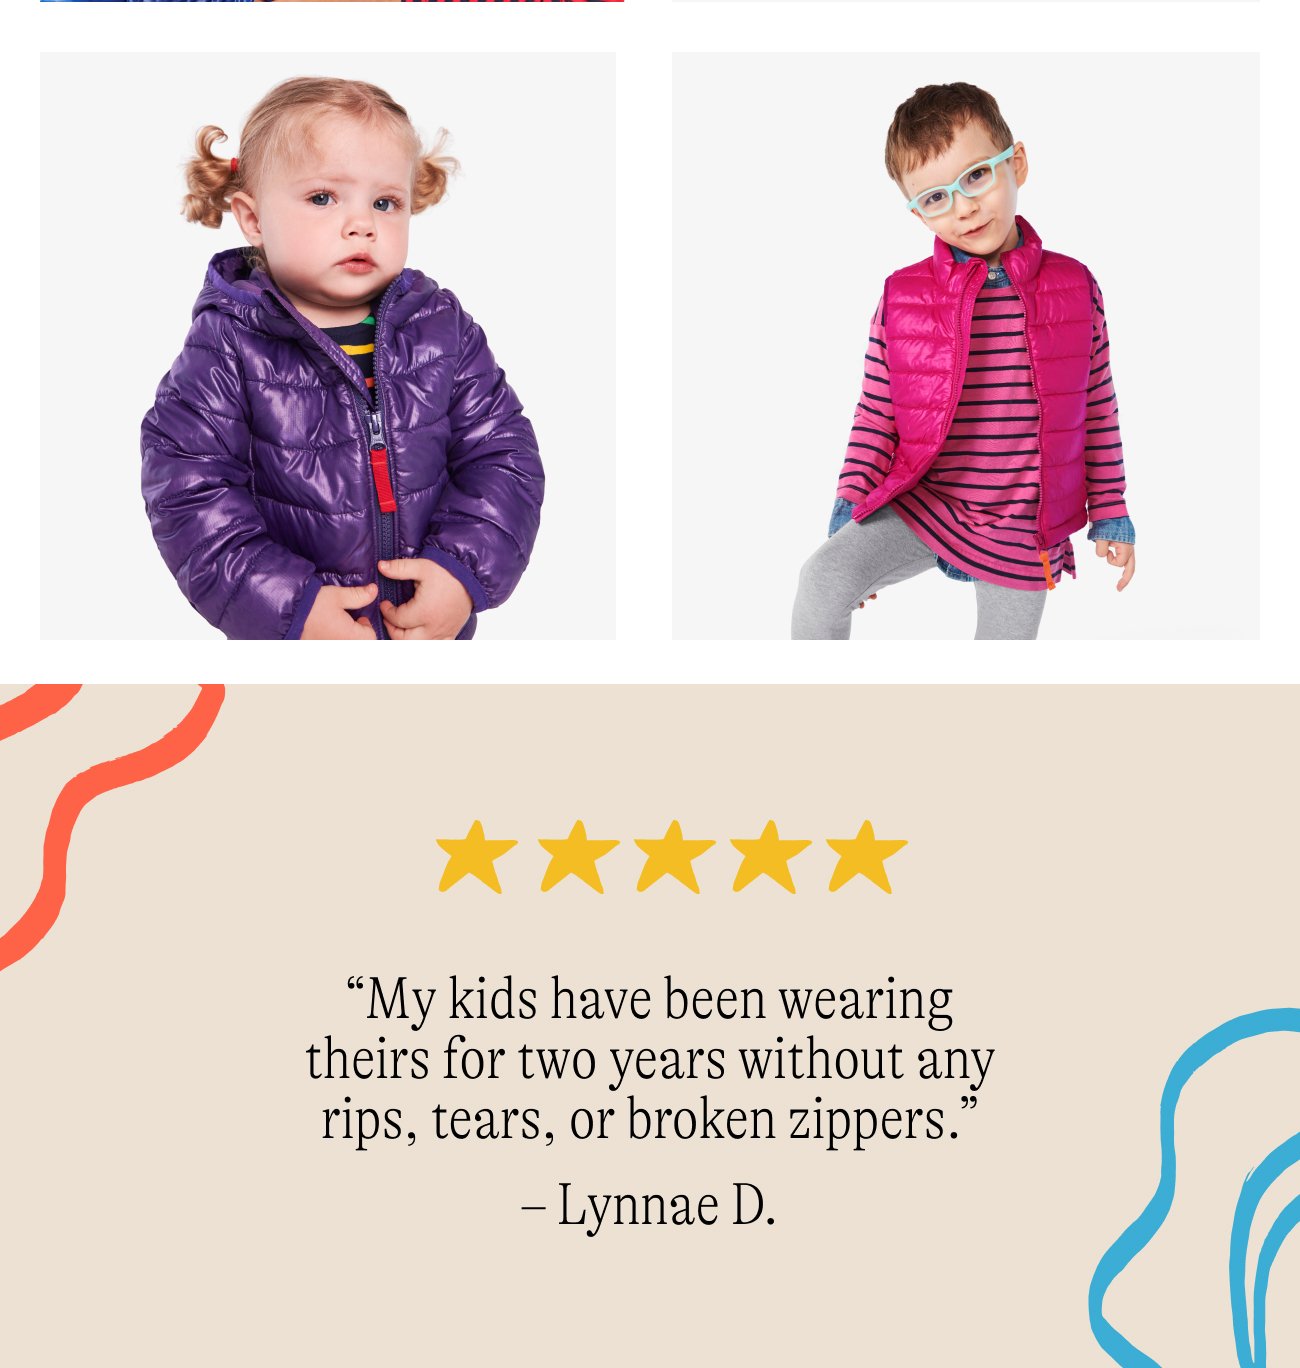 “My kids have been wearing theirs for two years without any rips, tears, or broken zippers.” – Lynnae D.